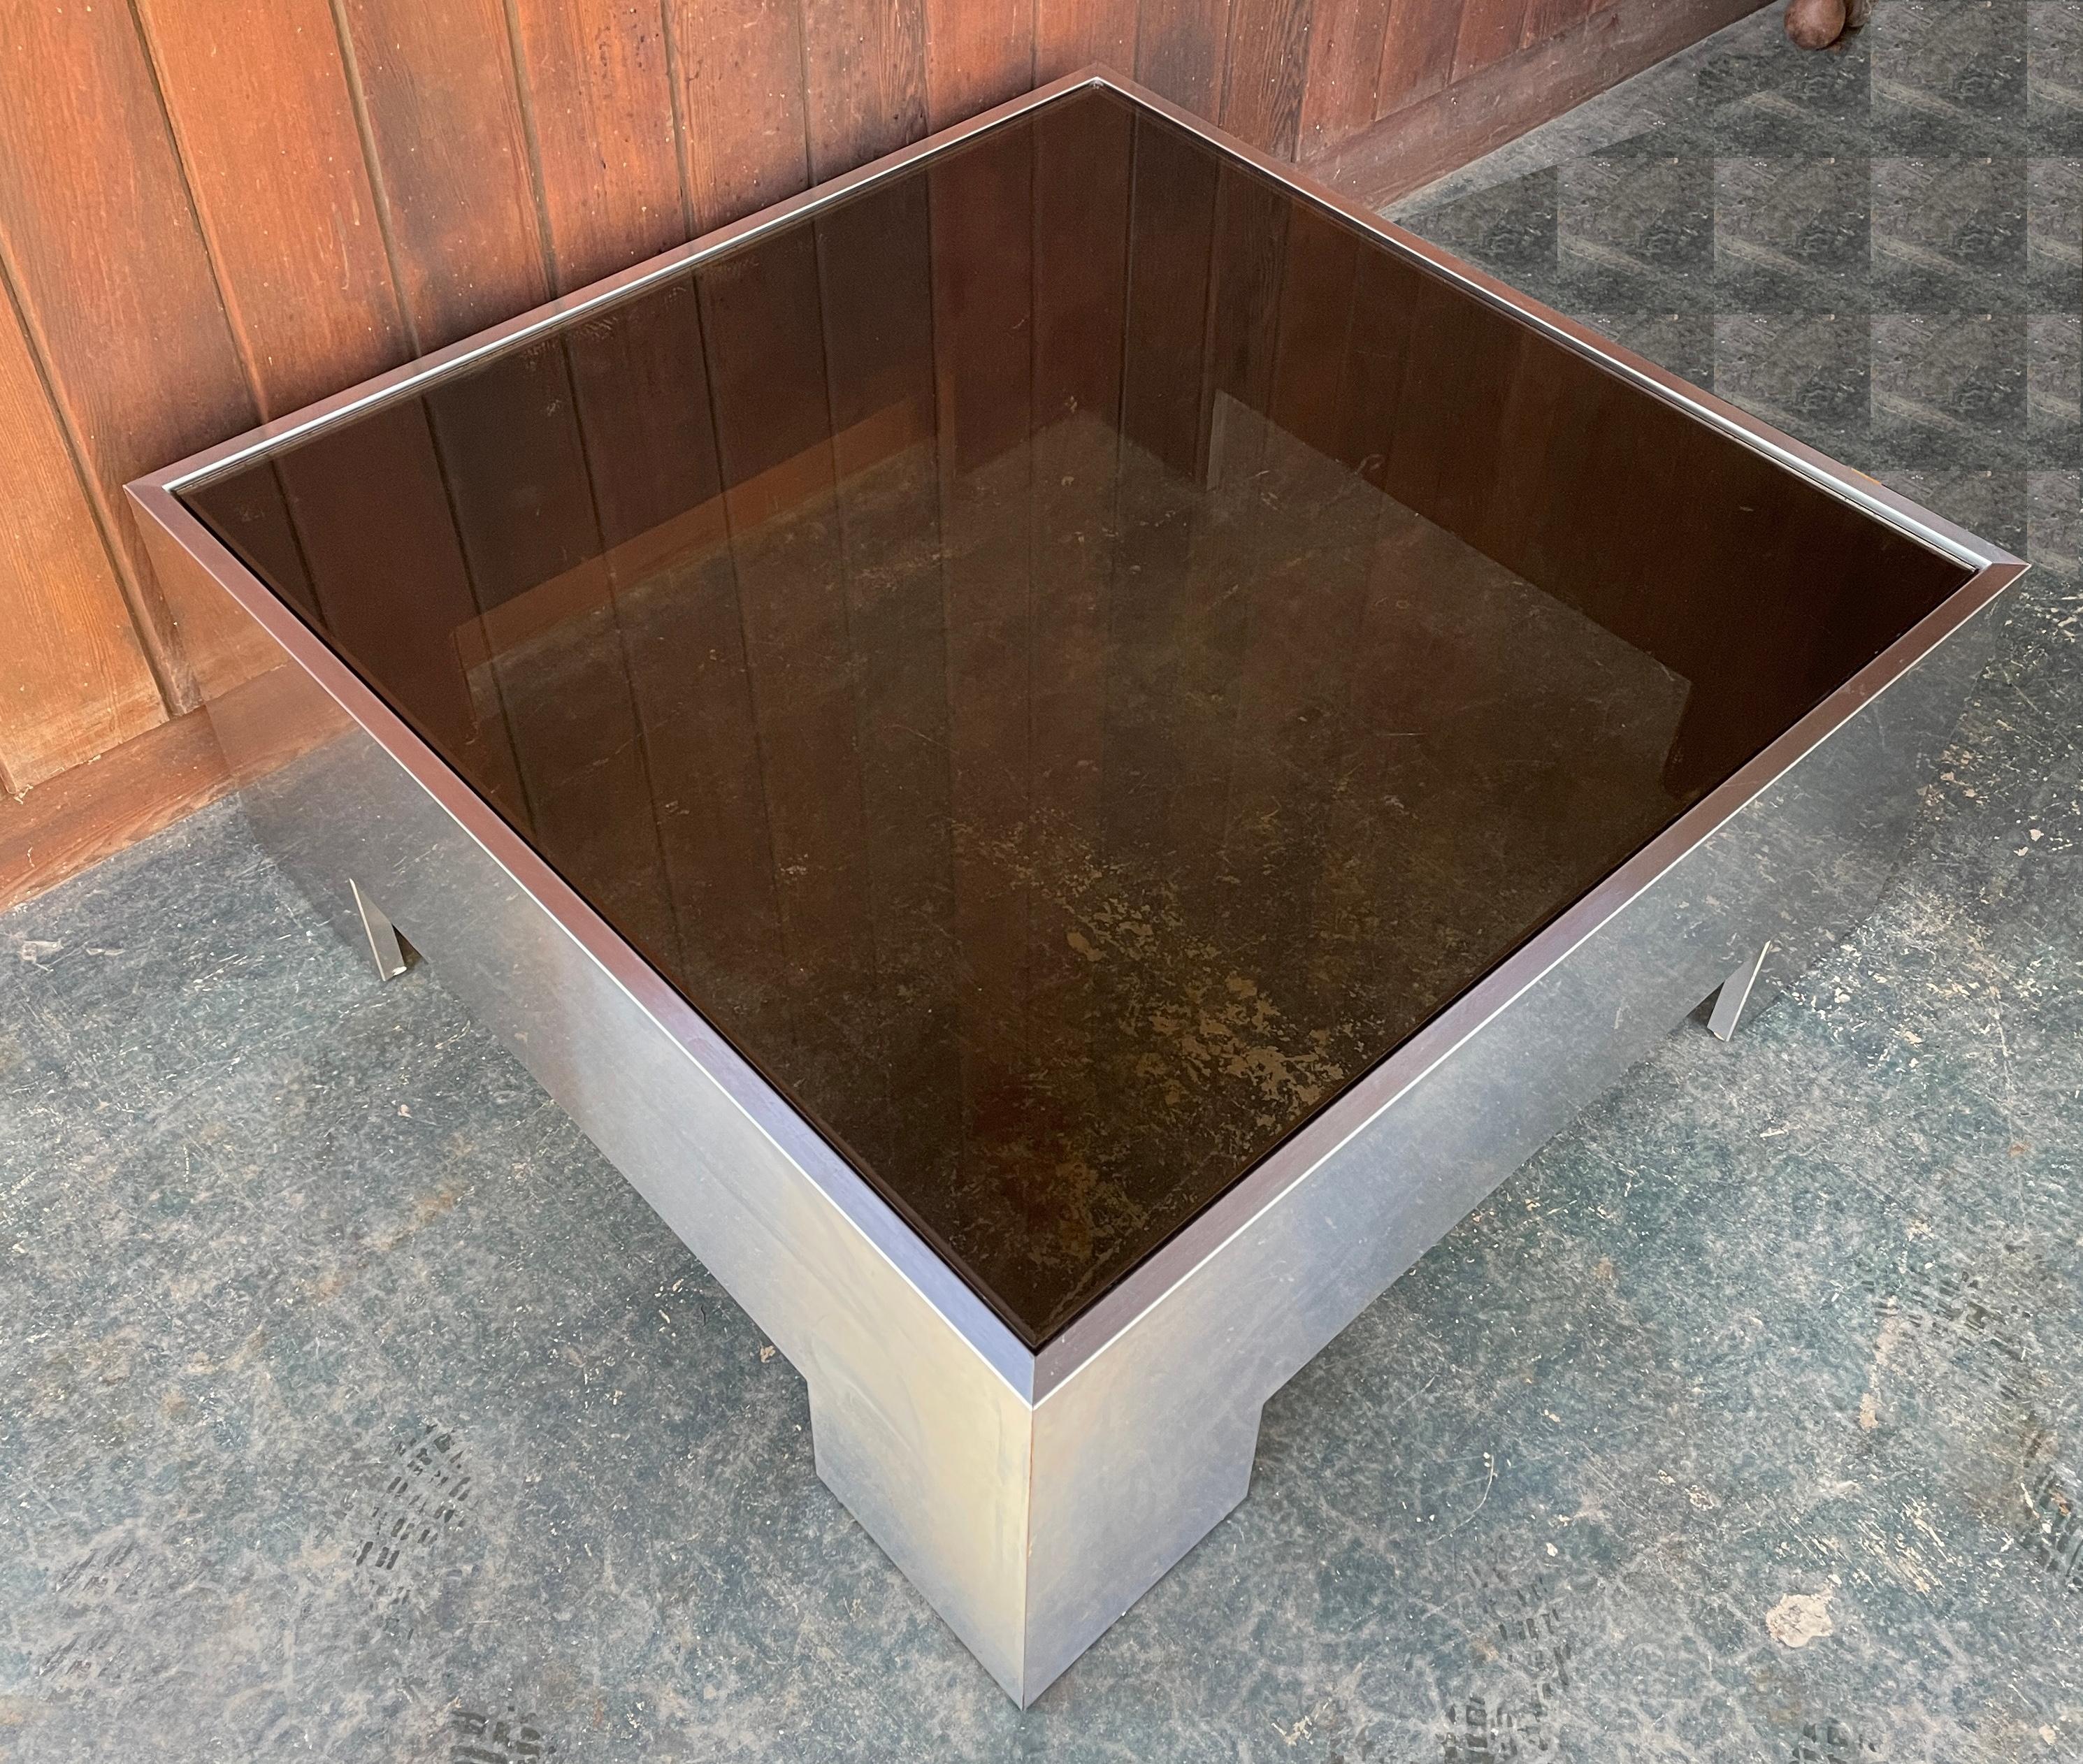 No chips to glass, but scratches to top surfaces from normal uses. No makers markings. Plywood core wrapped in stainless steel.

Measures: W 38 x D 38 x H 15.25 in.